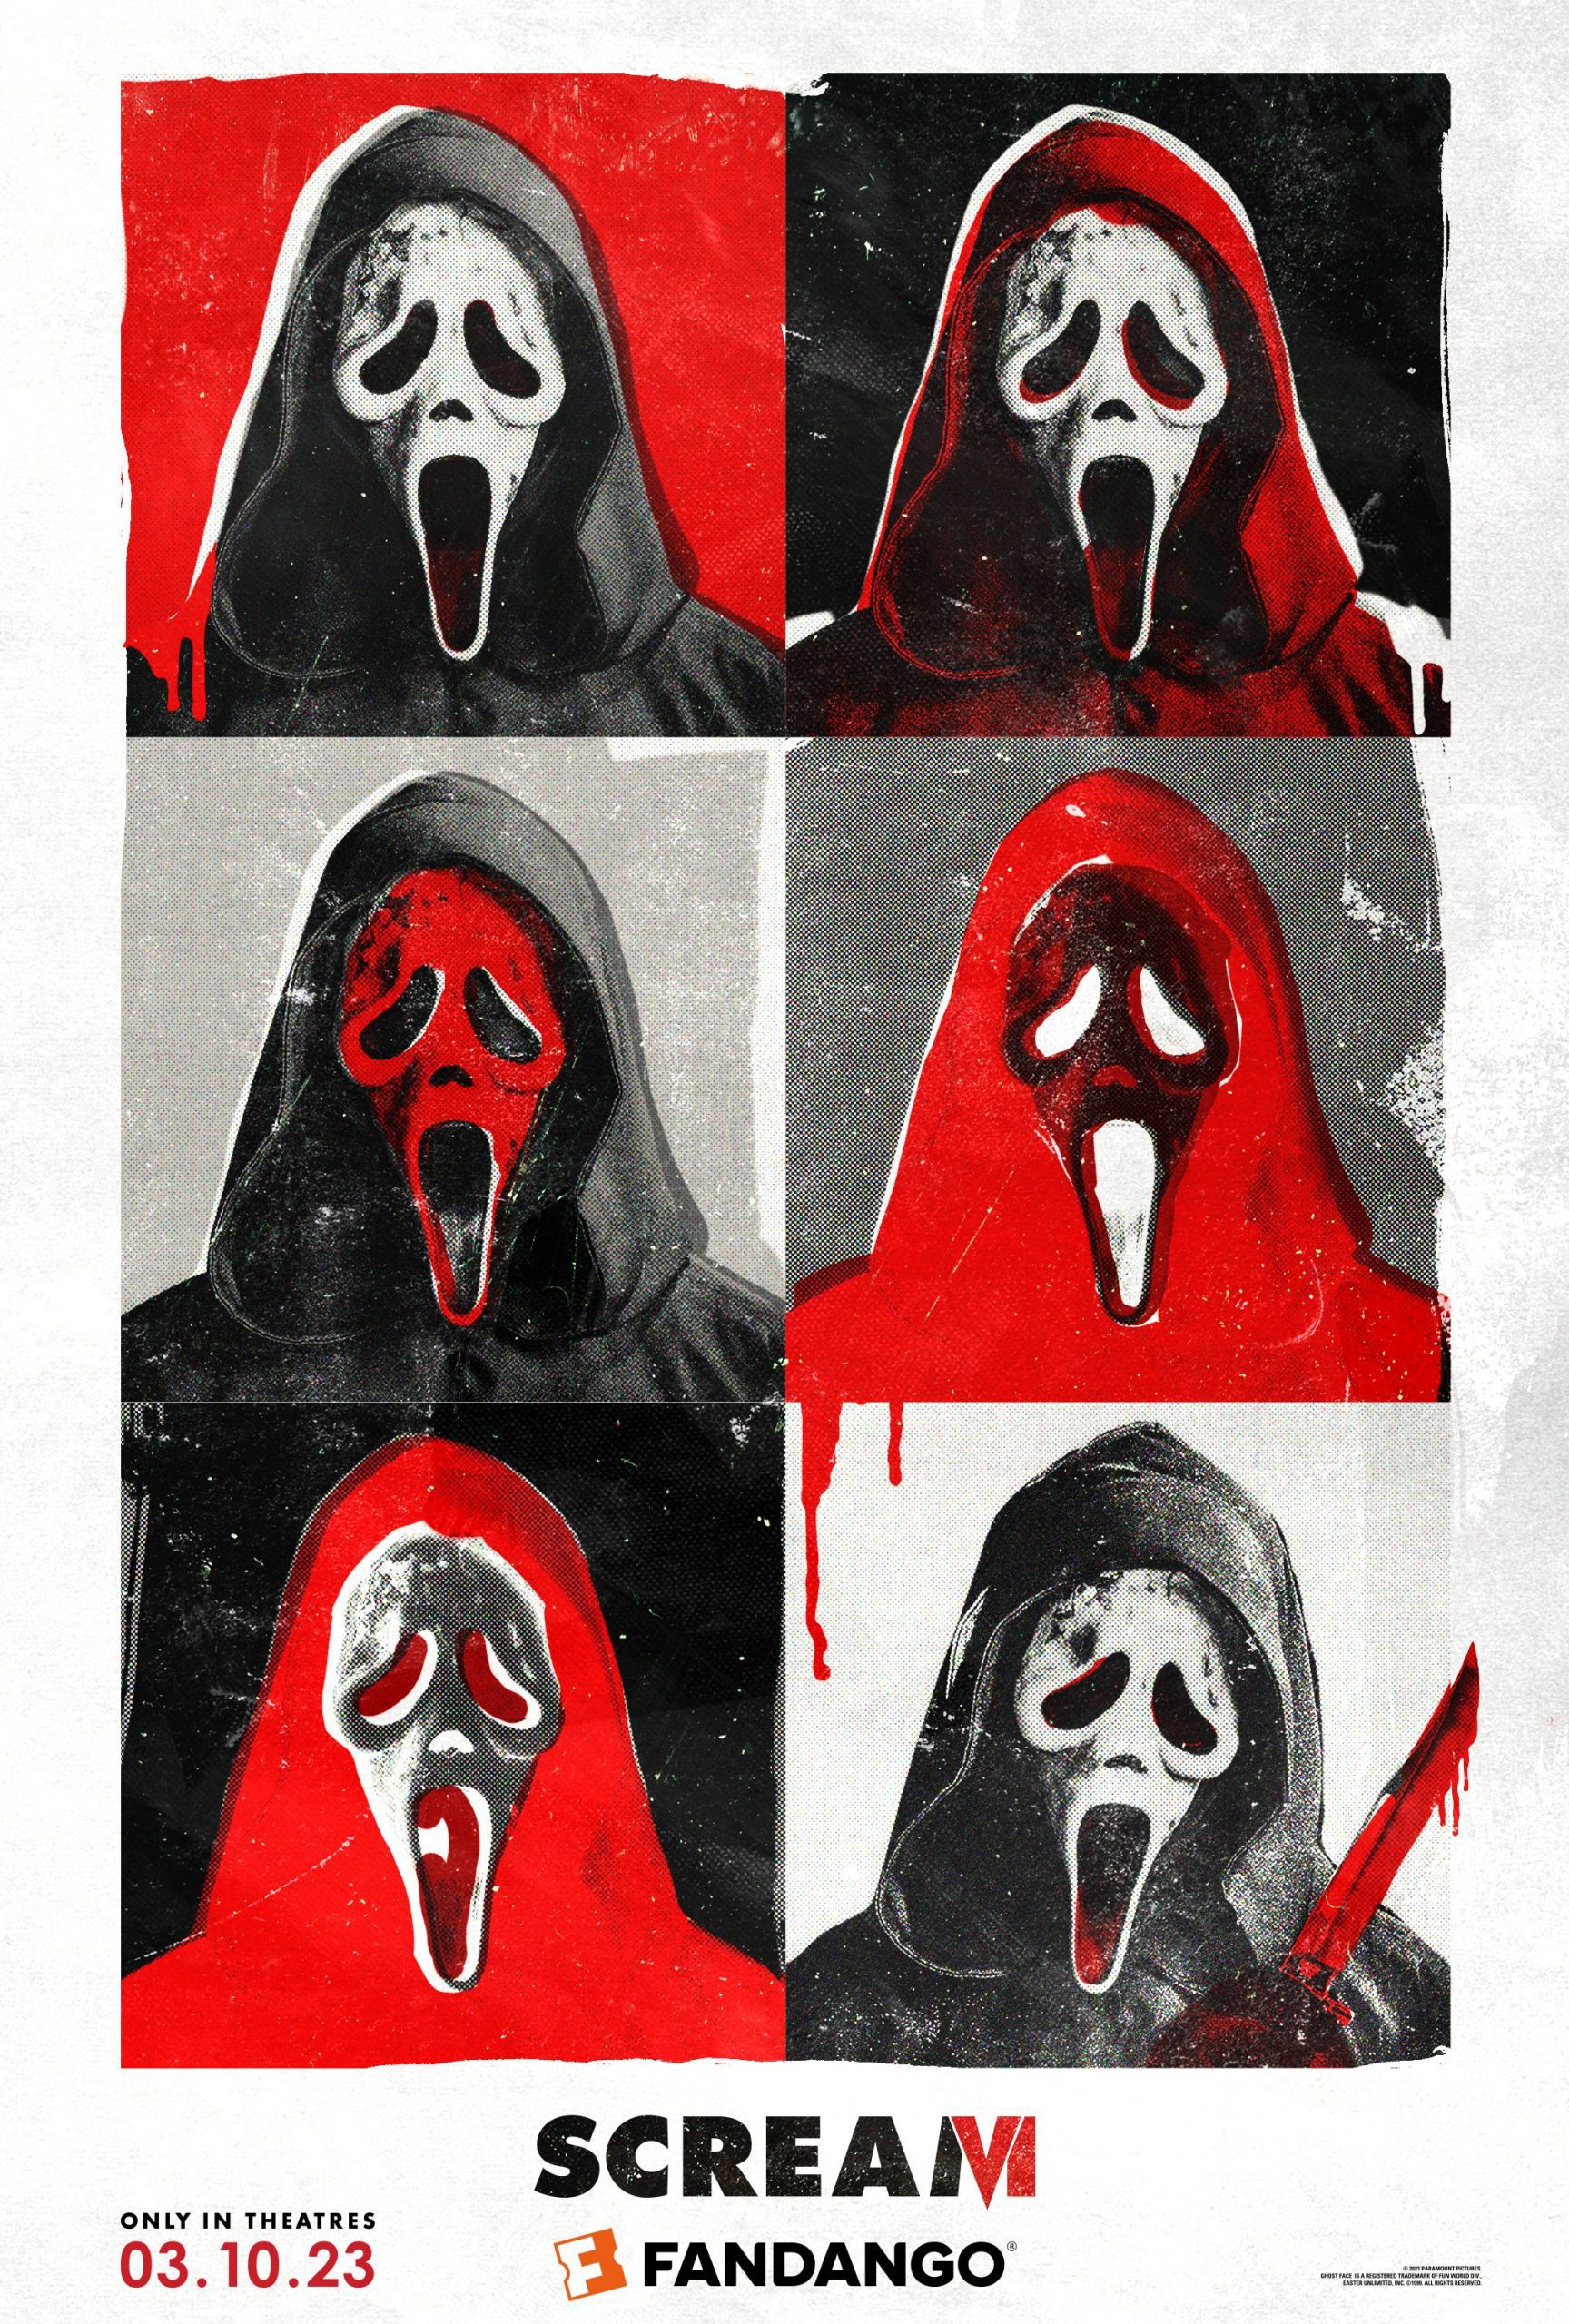 Scream 6 promo art was inspired by the board game Guess Who